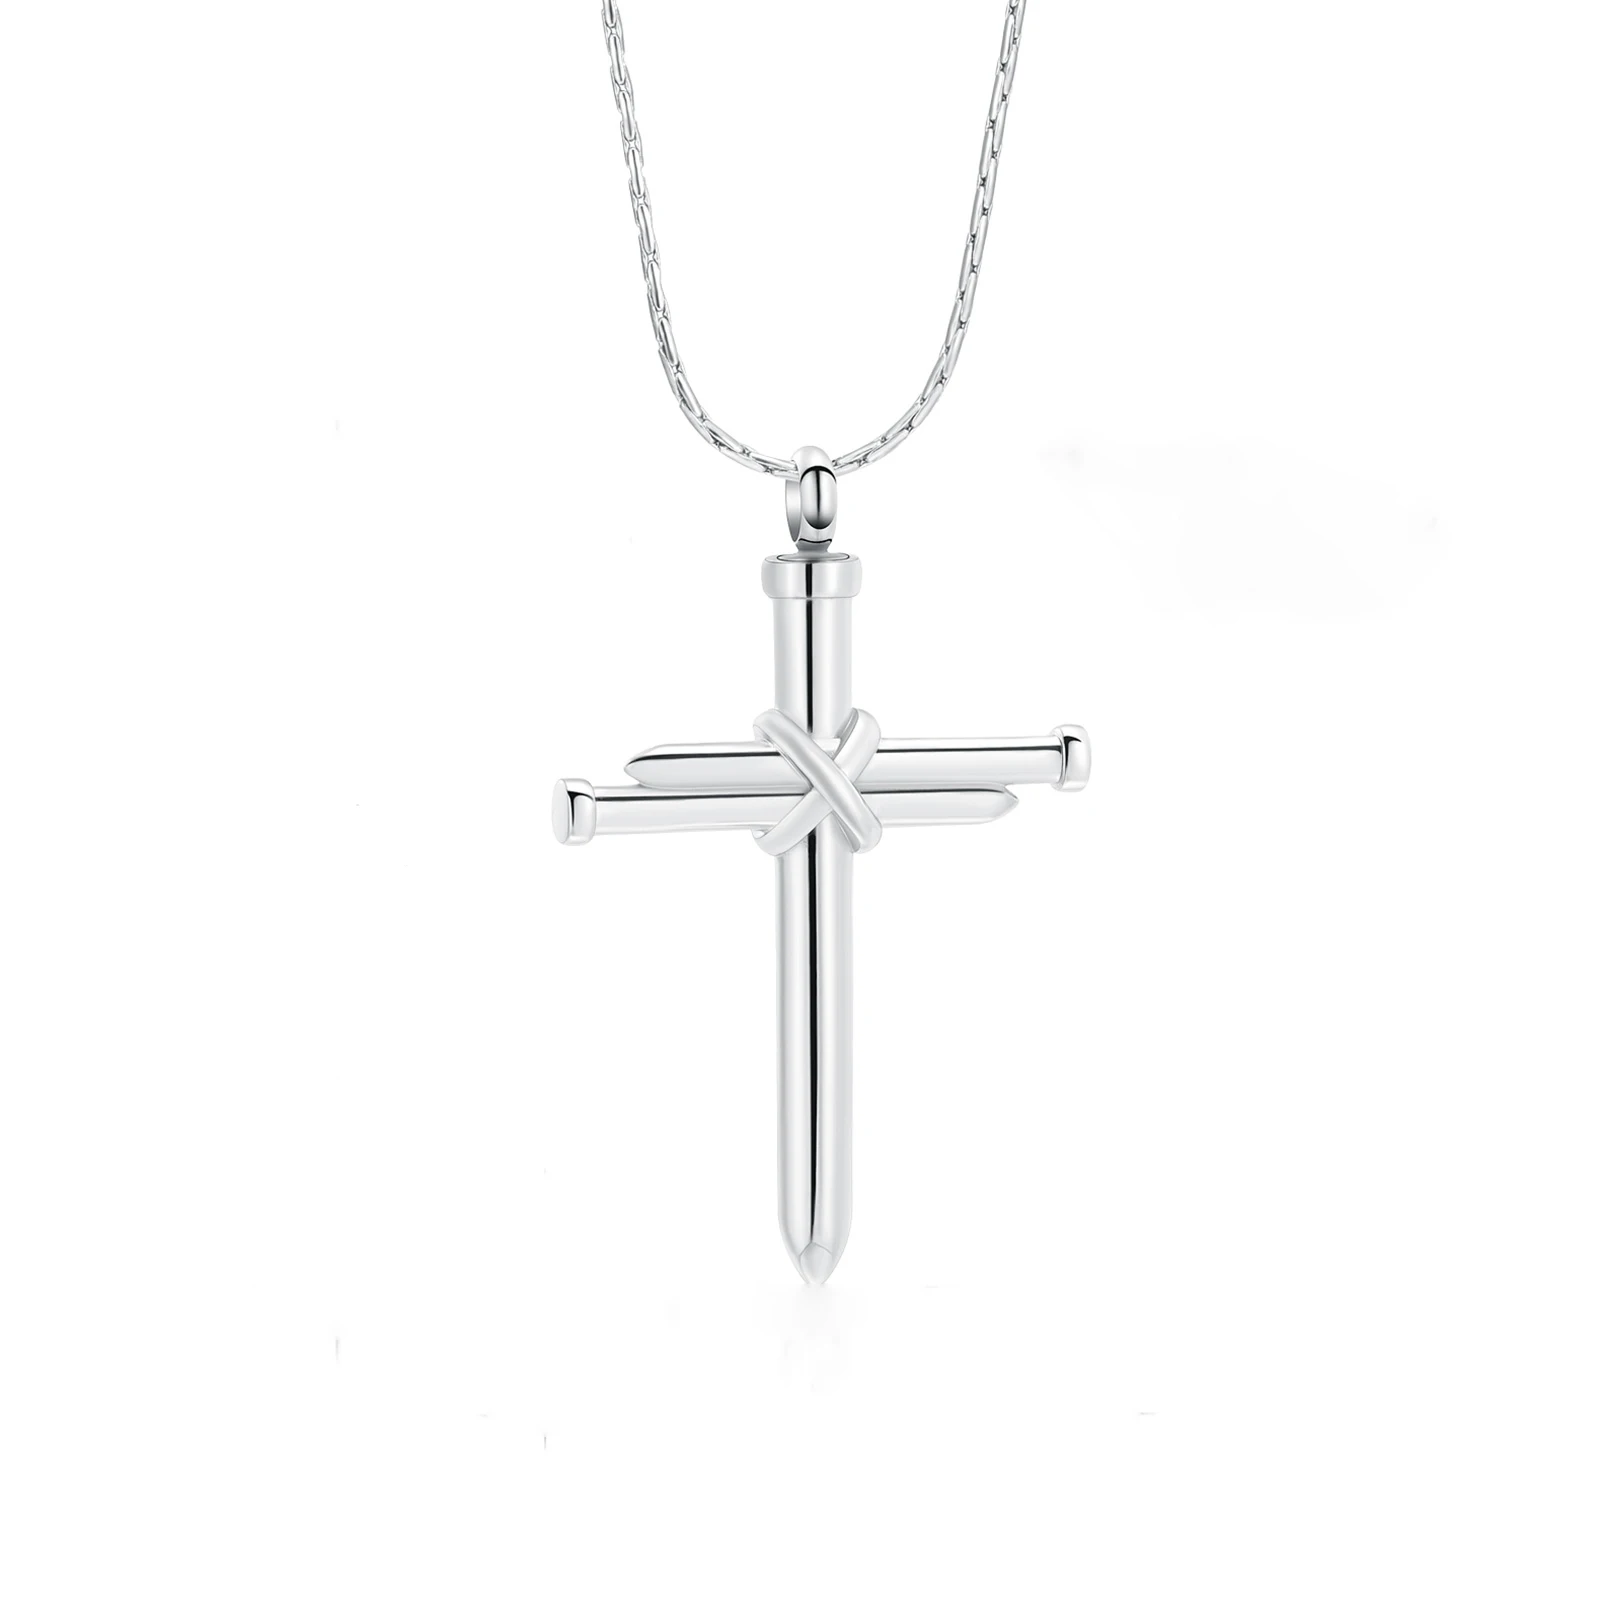 Nail Cross Pendant New Fashion Design Necklace Cremation Jewelry Memorial Ashes Holder Urn Personalized Men's Necklace Gift